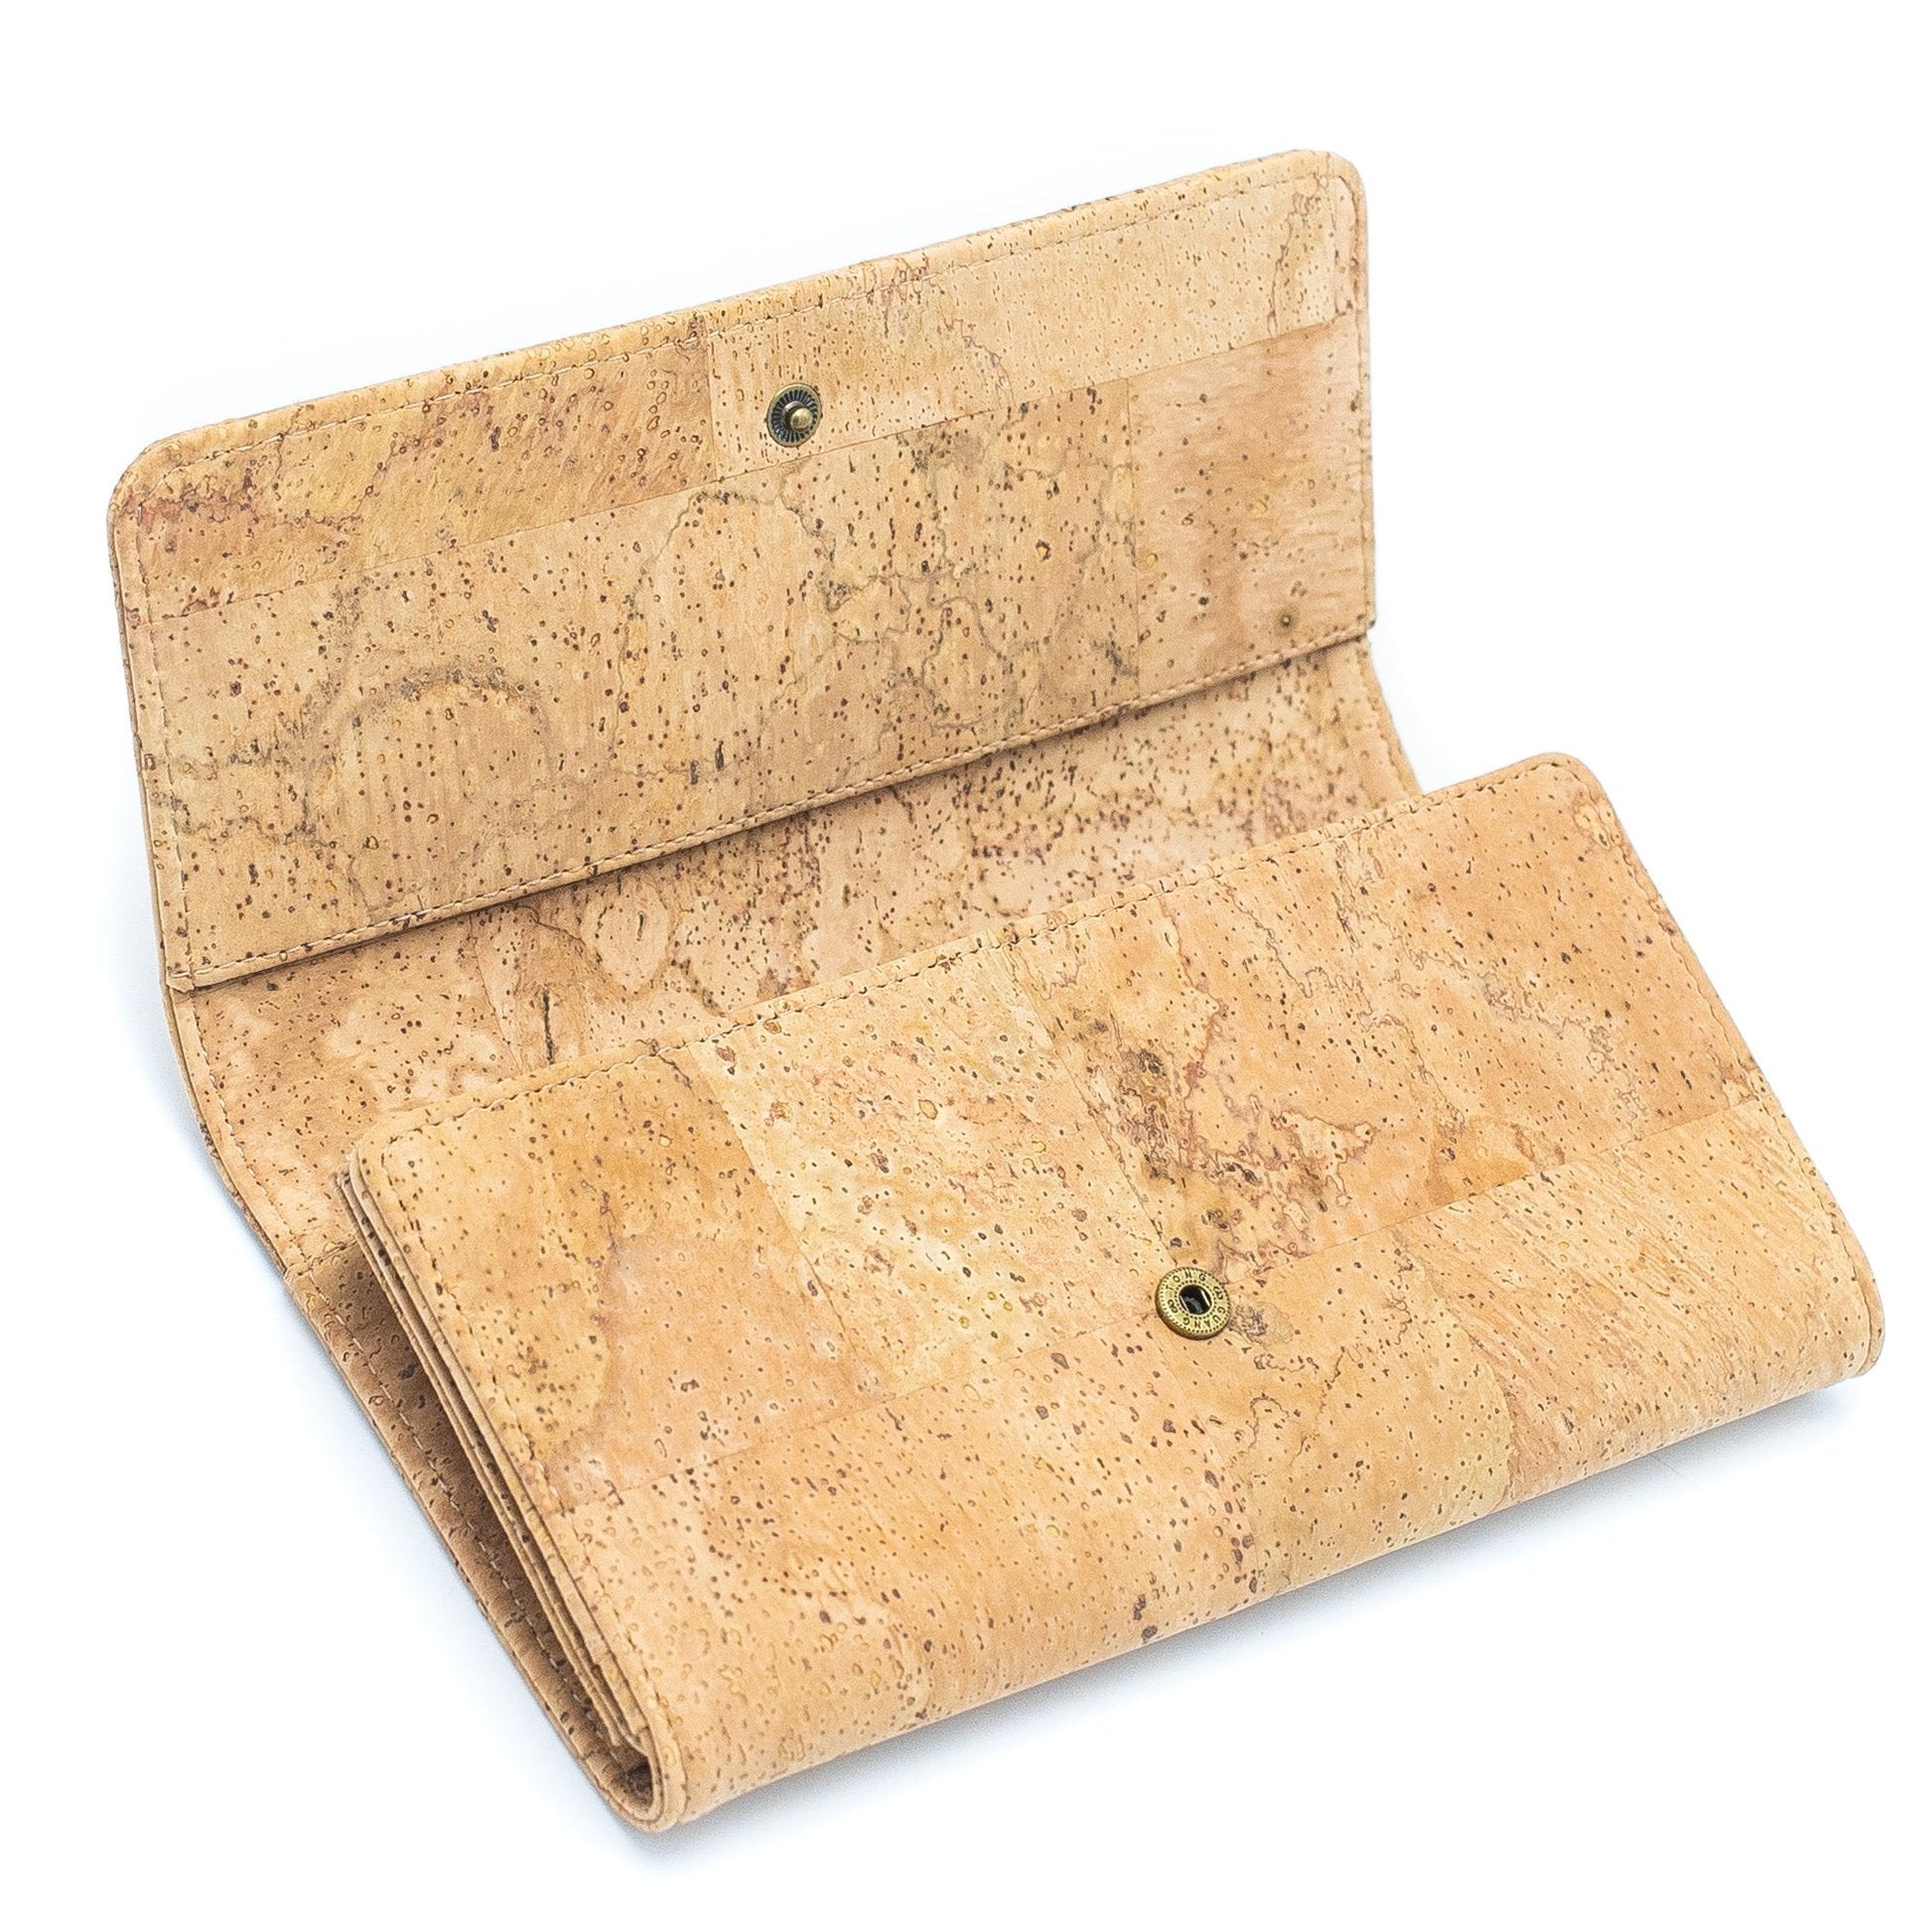 women’s wallet, sustainable wallet, small womens wallet, slim Ethical wallet, minimalist wallet, leather women wallet, engraved wallet, credit card wallet, cork wallet, organic wallet, vegan wallet, eco-friendly wallet, gift for her, handmade wallet, zero waste wallet, Cruelty free wallet, Compact wallets, Faux leather wallet